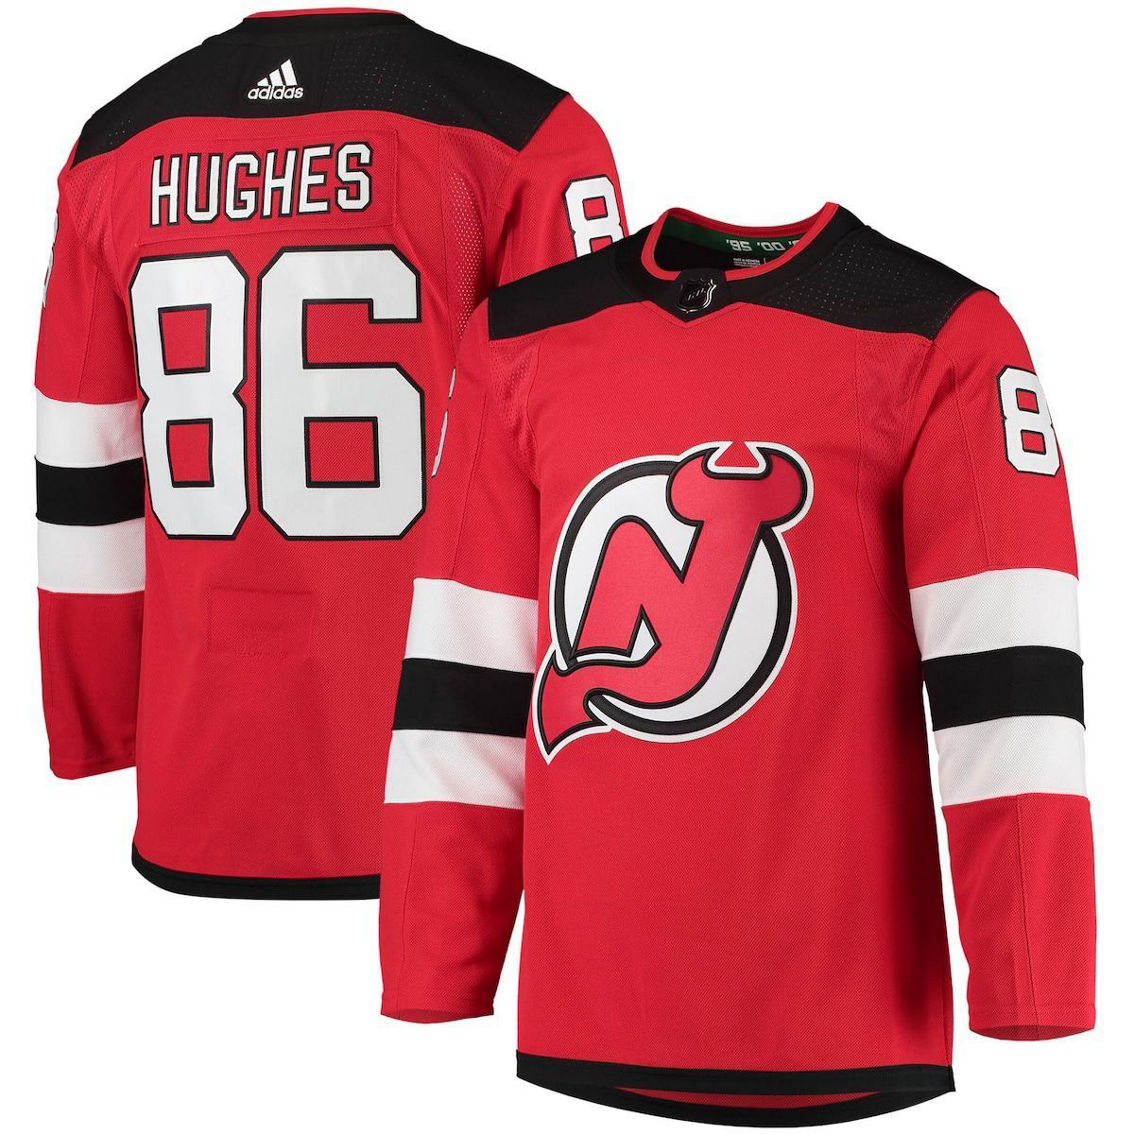 adidas Men's Jack Hughes Red New Jersey Devils Home Primegreen Authentic Pro Player Jersey - Image 2 of 4